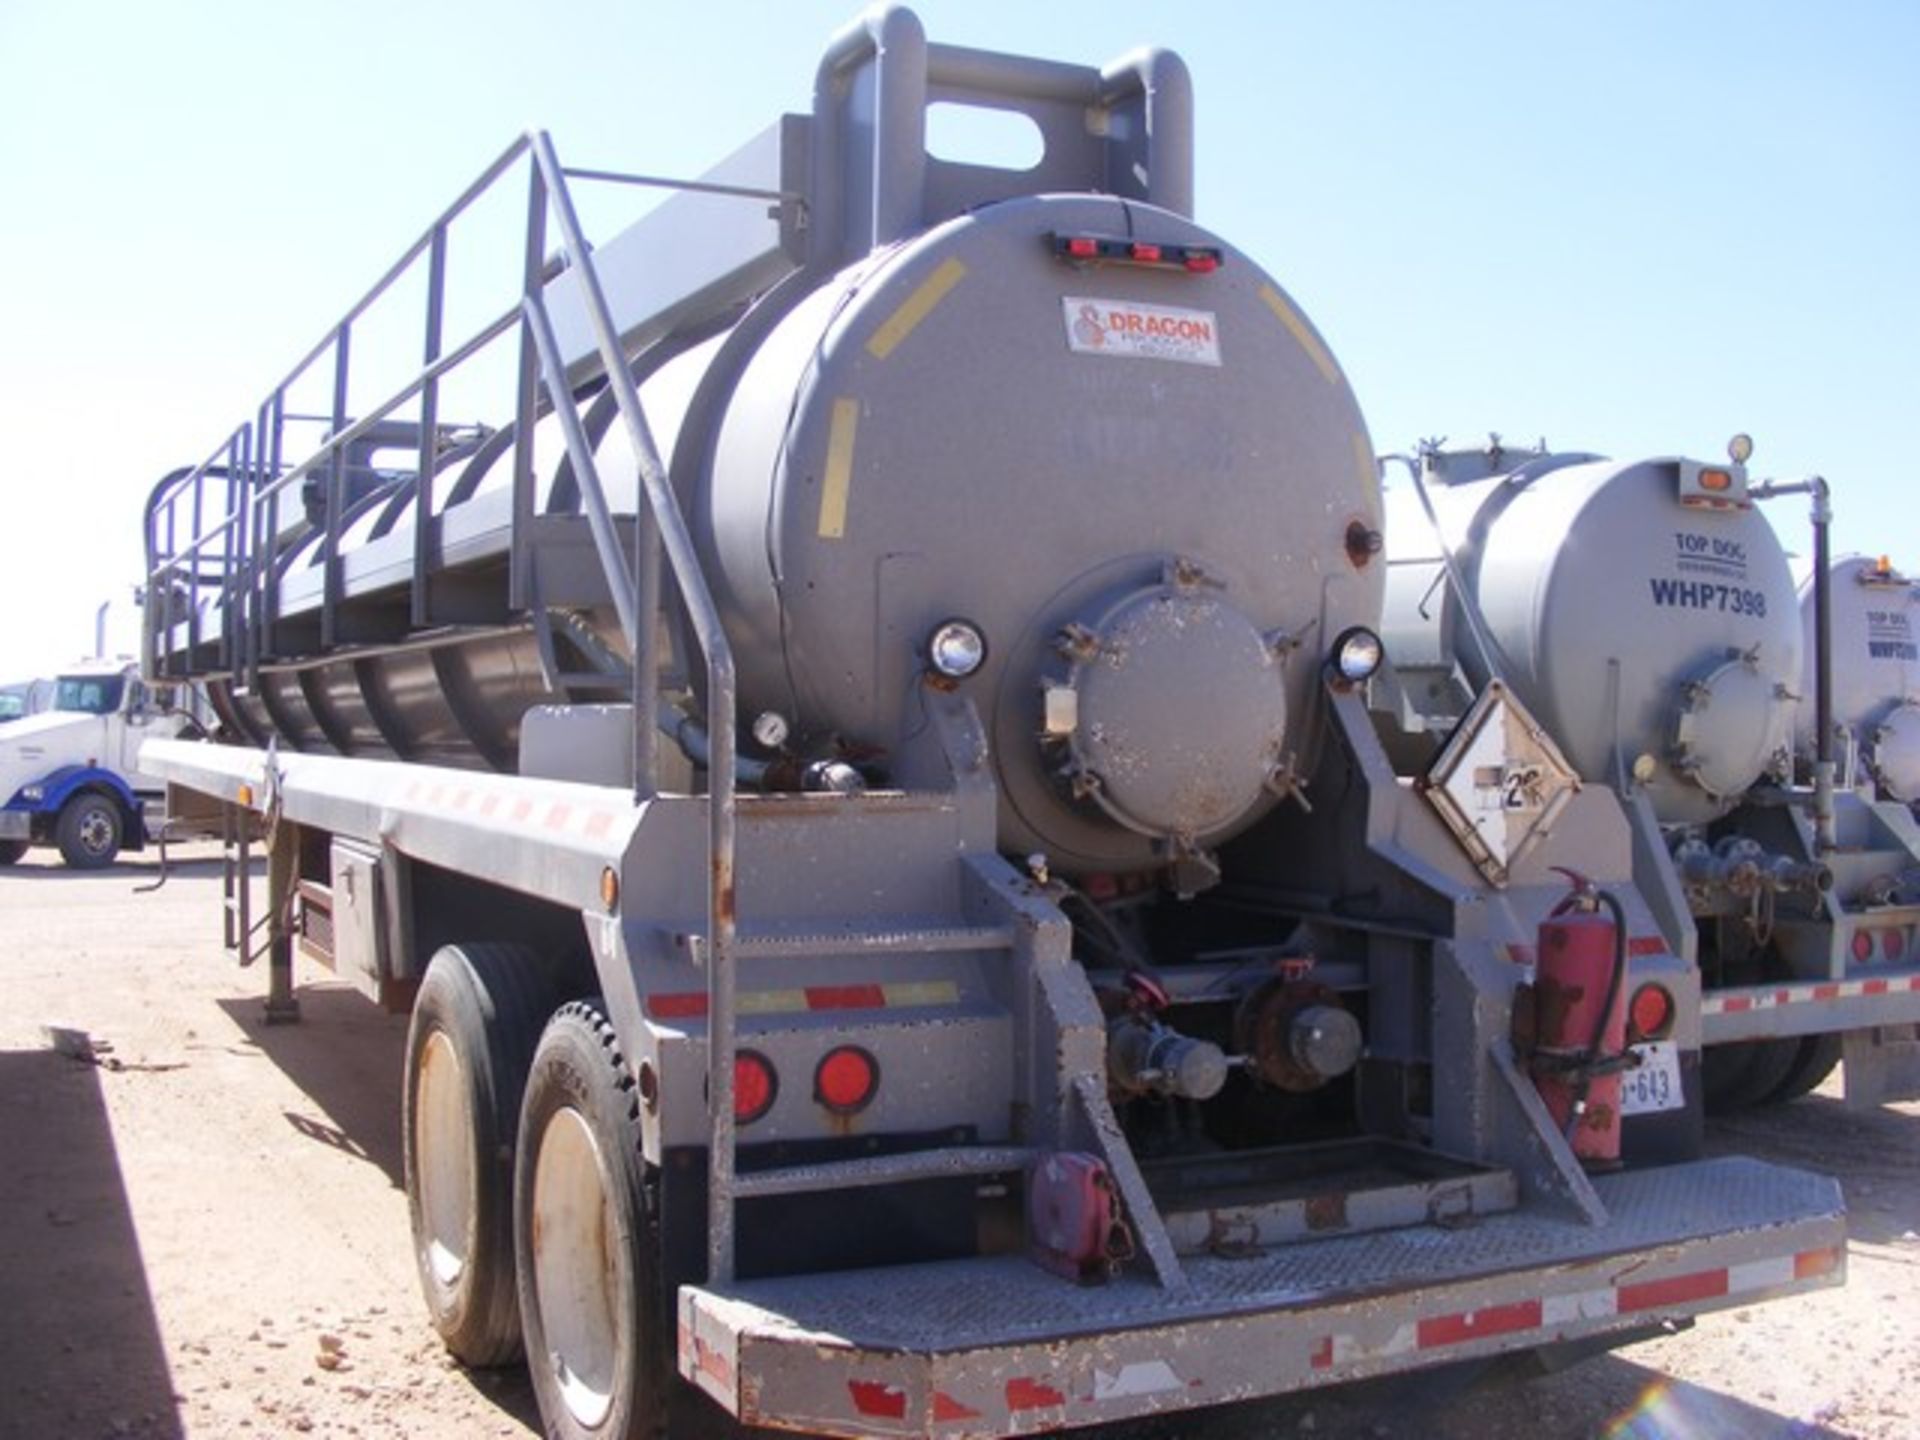 Located in YARD 1 - Midland, TX (402) (X) 2008 DRAGON 130 BBL T/A VAC TRAILER, VIN- - Image 3 of 4